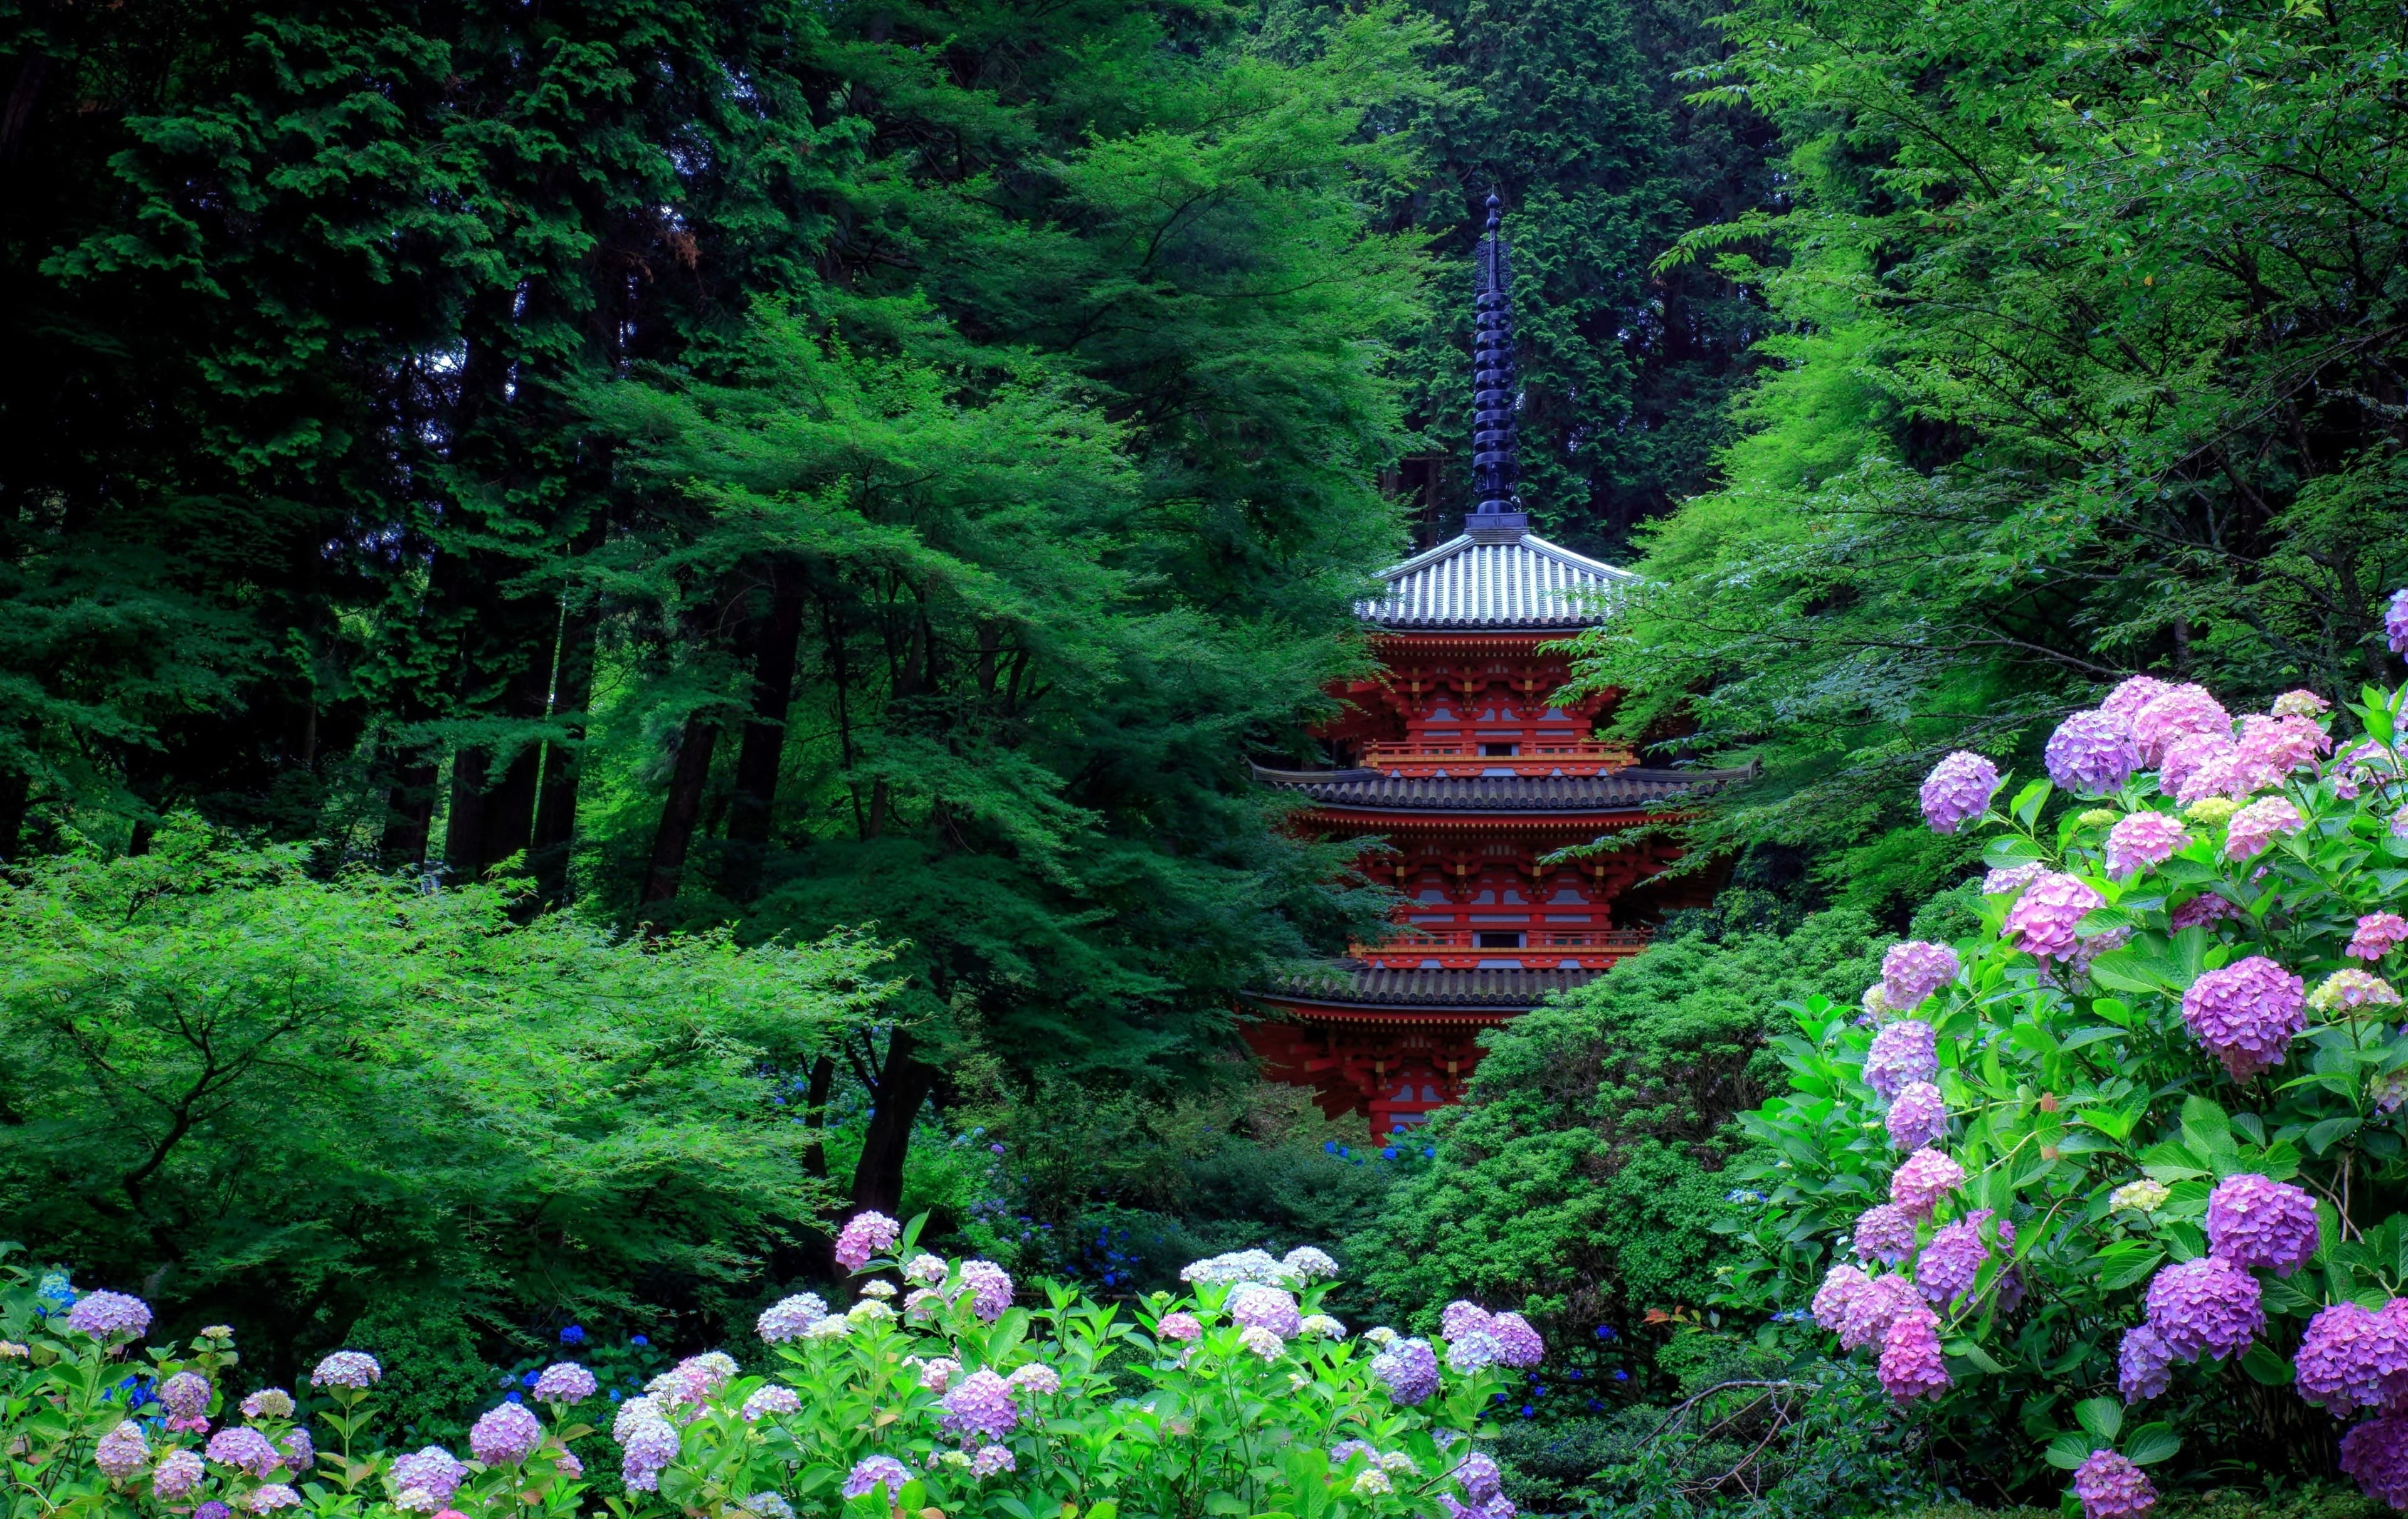 green and purple leaf plant, Asian architecture, pagoda, trees